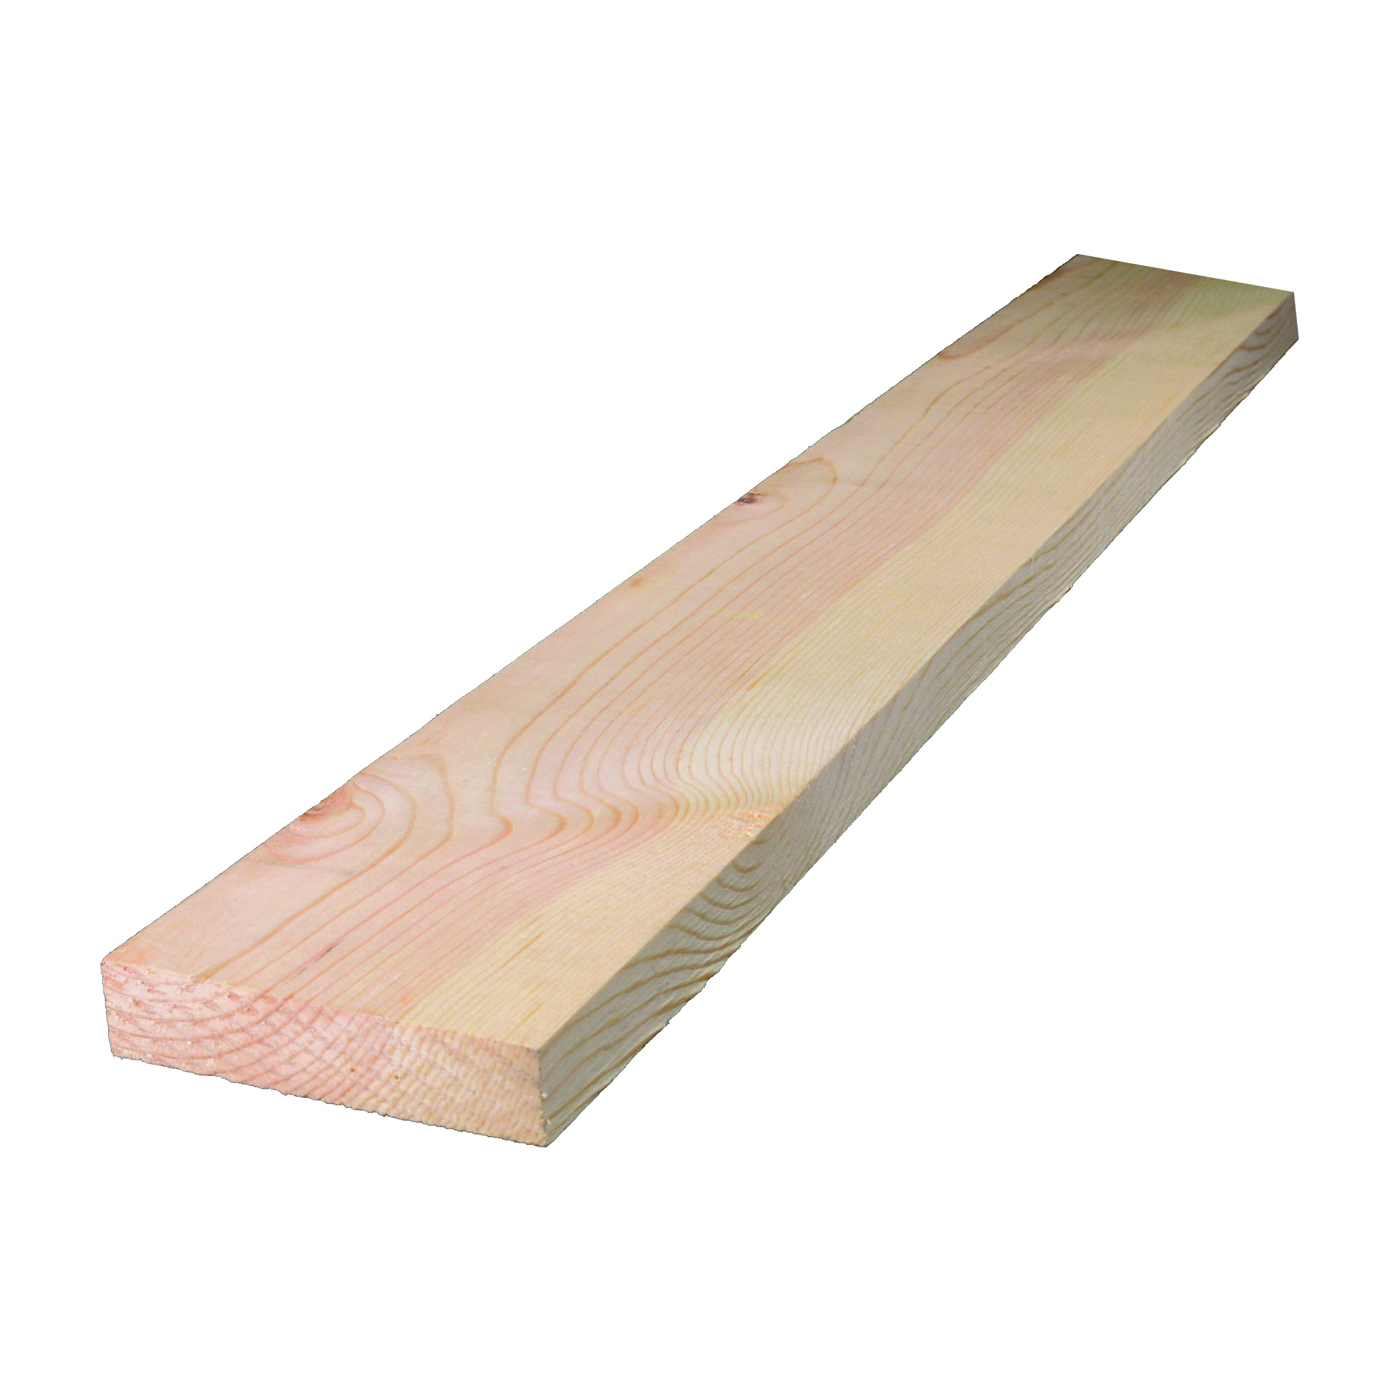 0Q1X4-70048C Common Board, 4 ft L Nominal, 4 in W Nominal, 1 in Thick Nominal